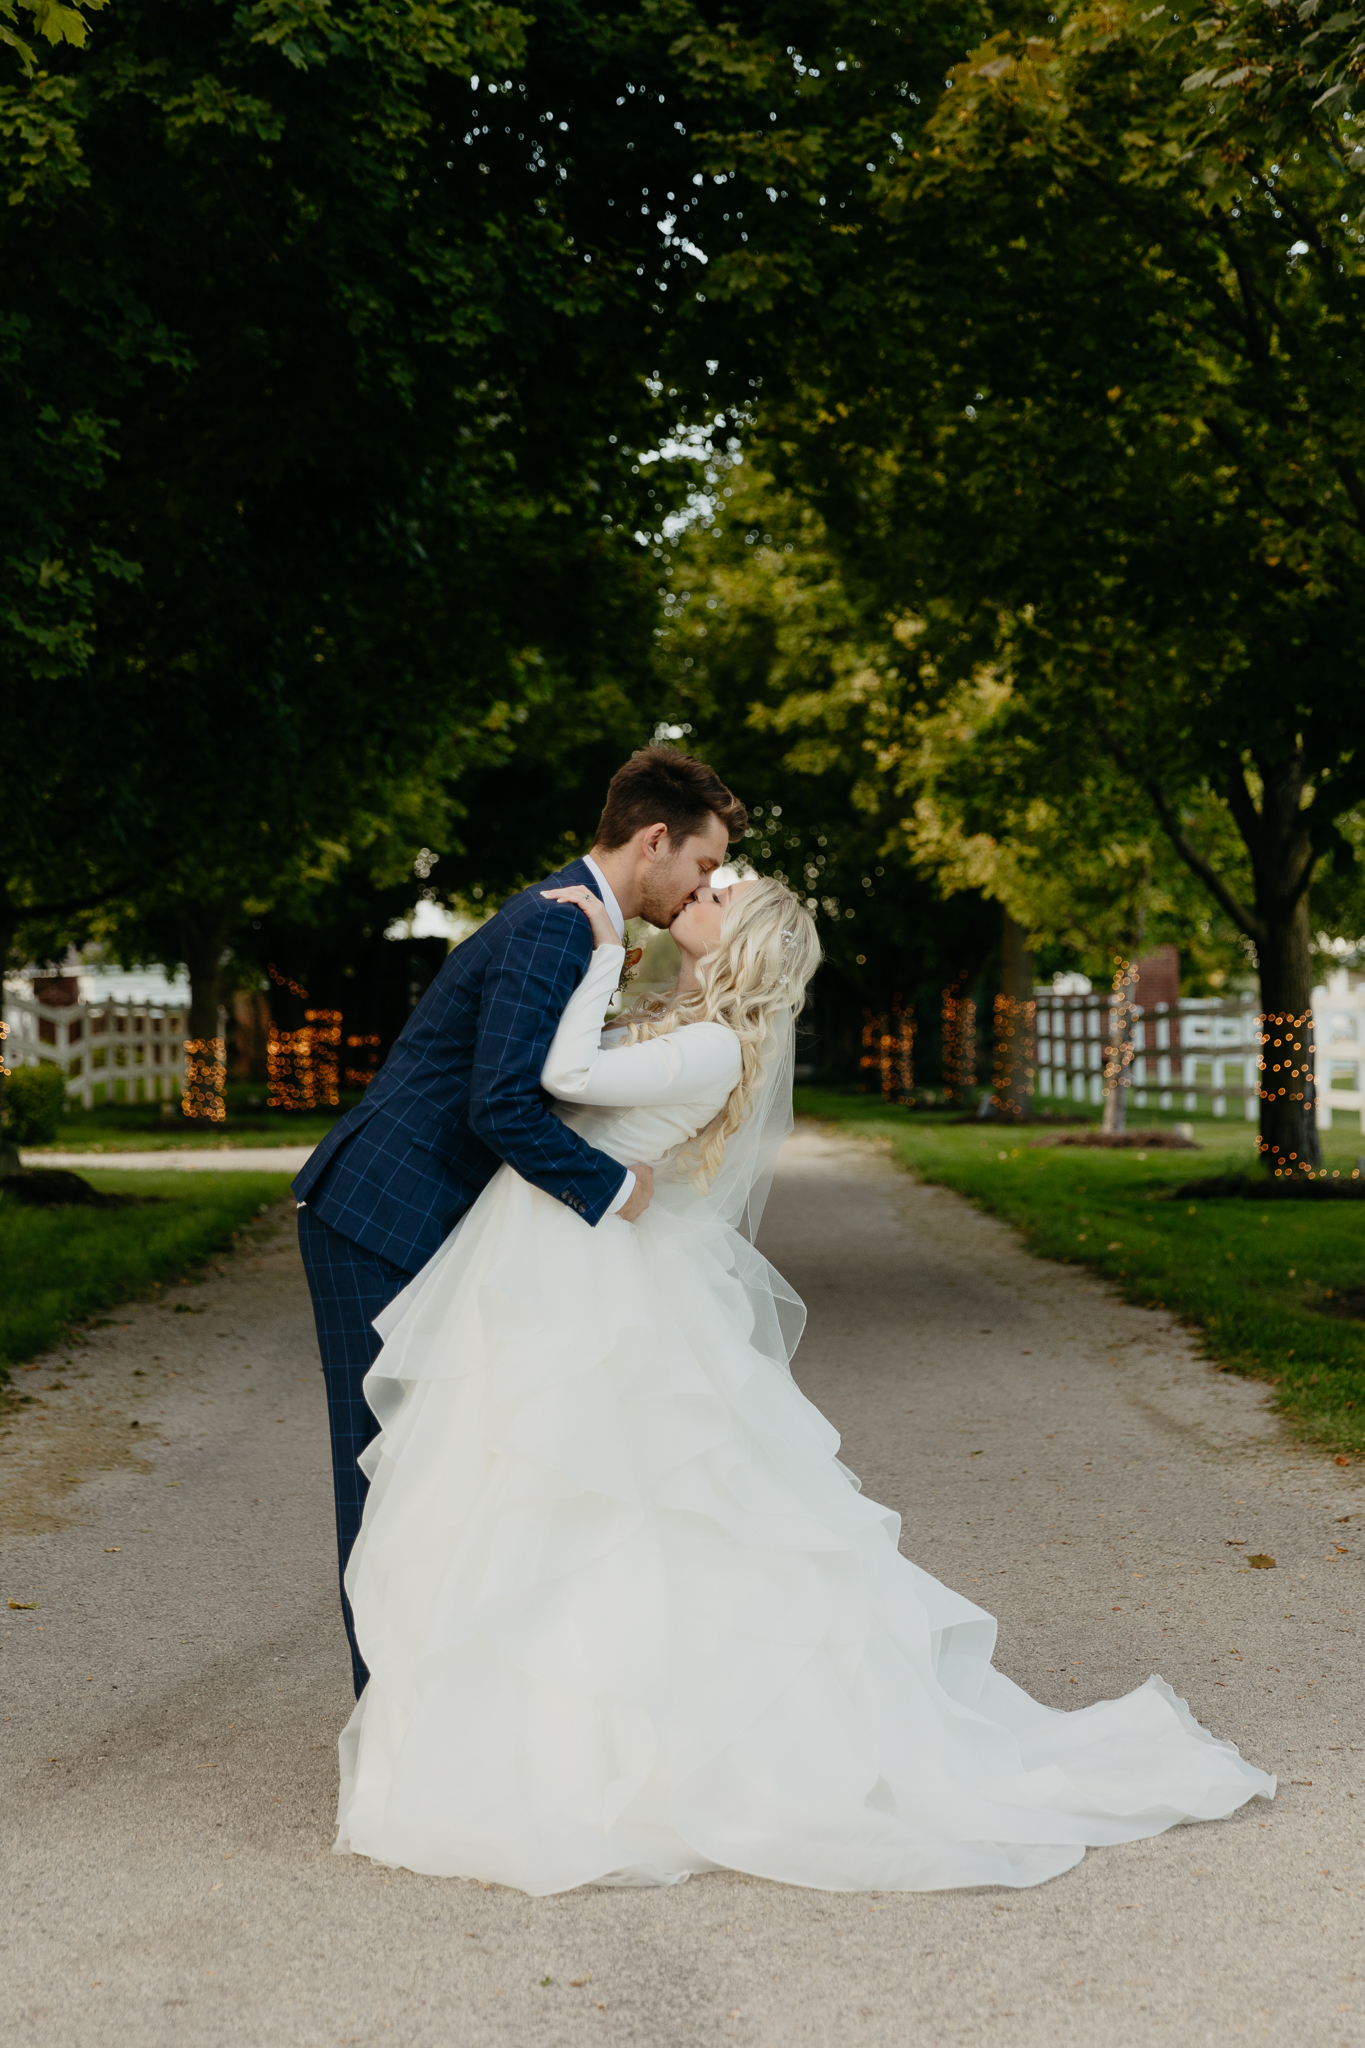 Bride and groom walk down tree lined driveway hand in hand while looking back, then kiss